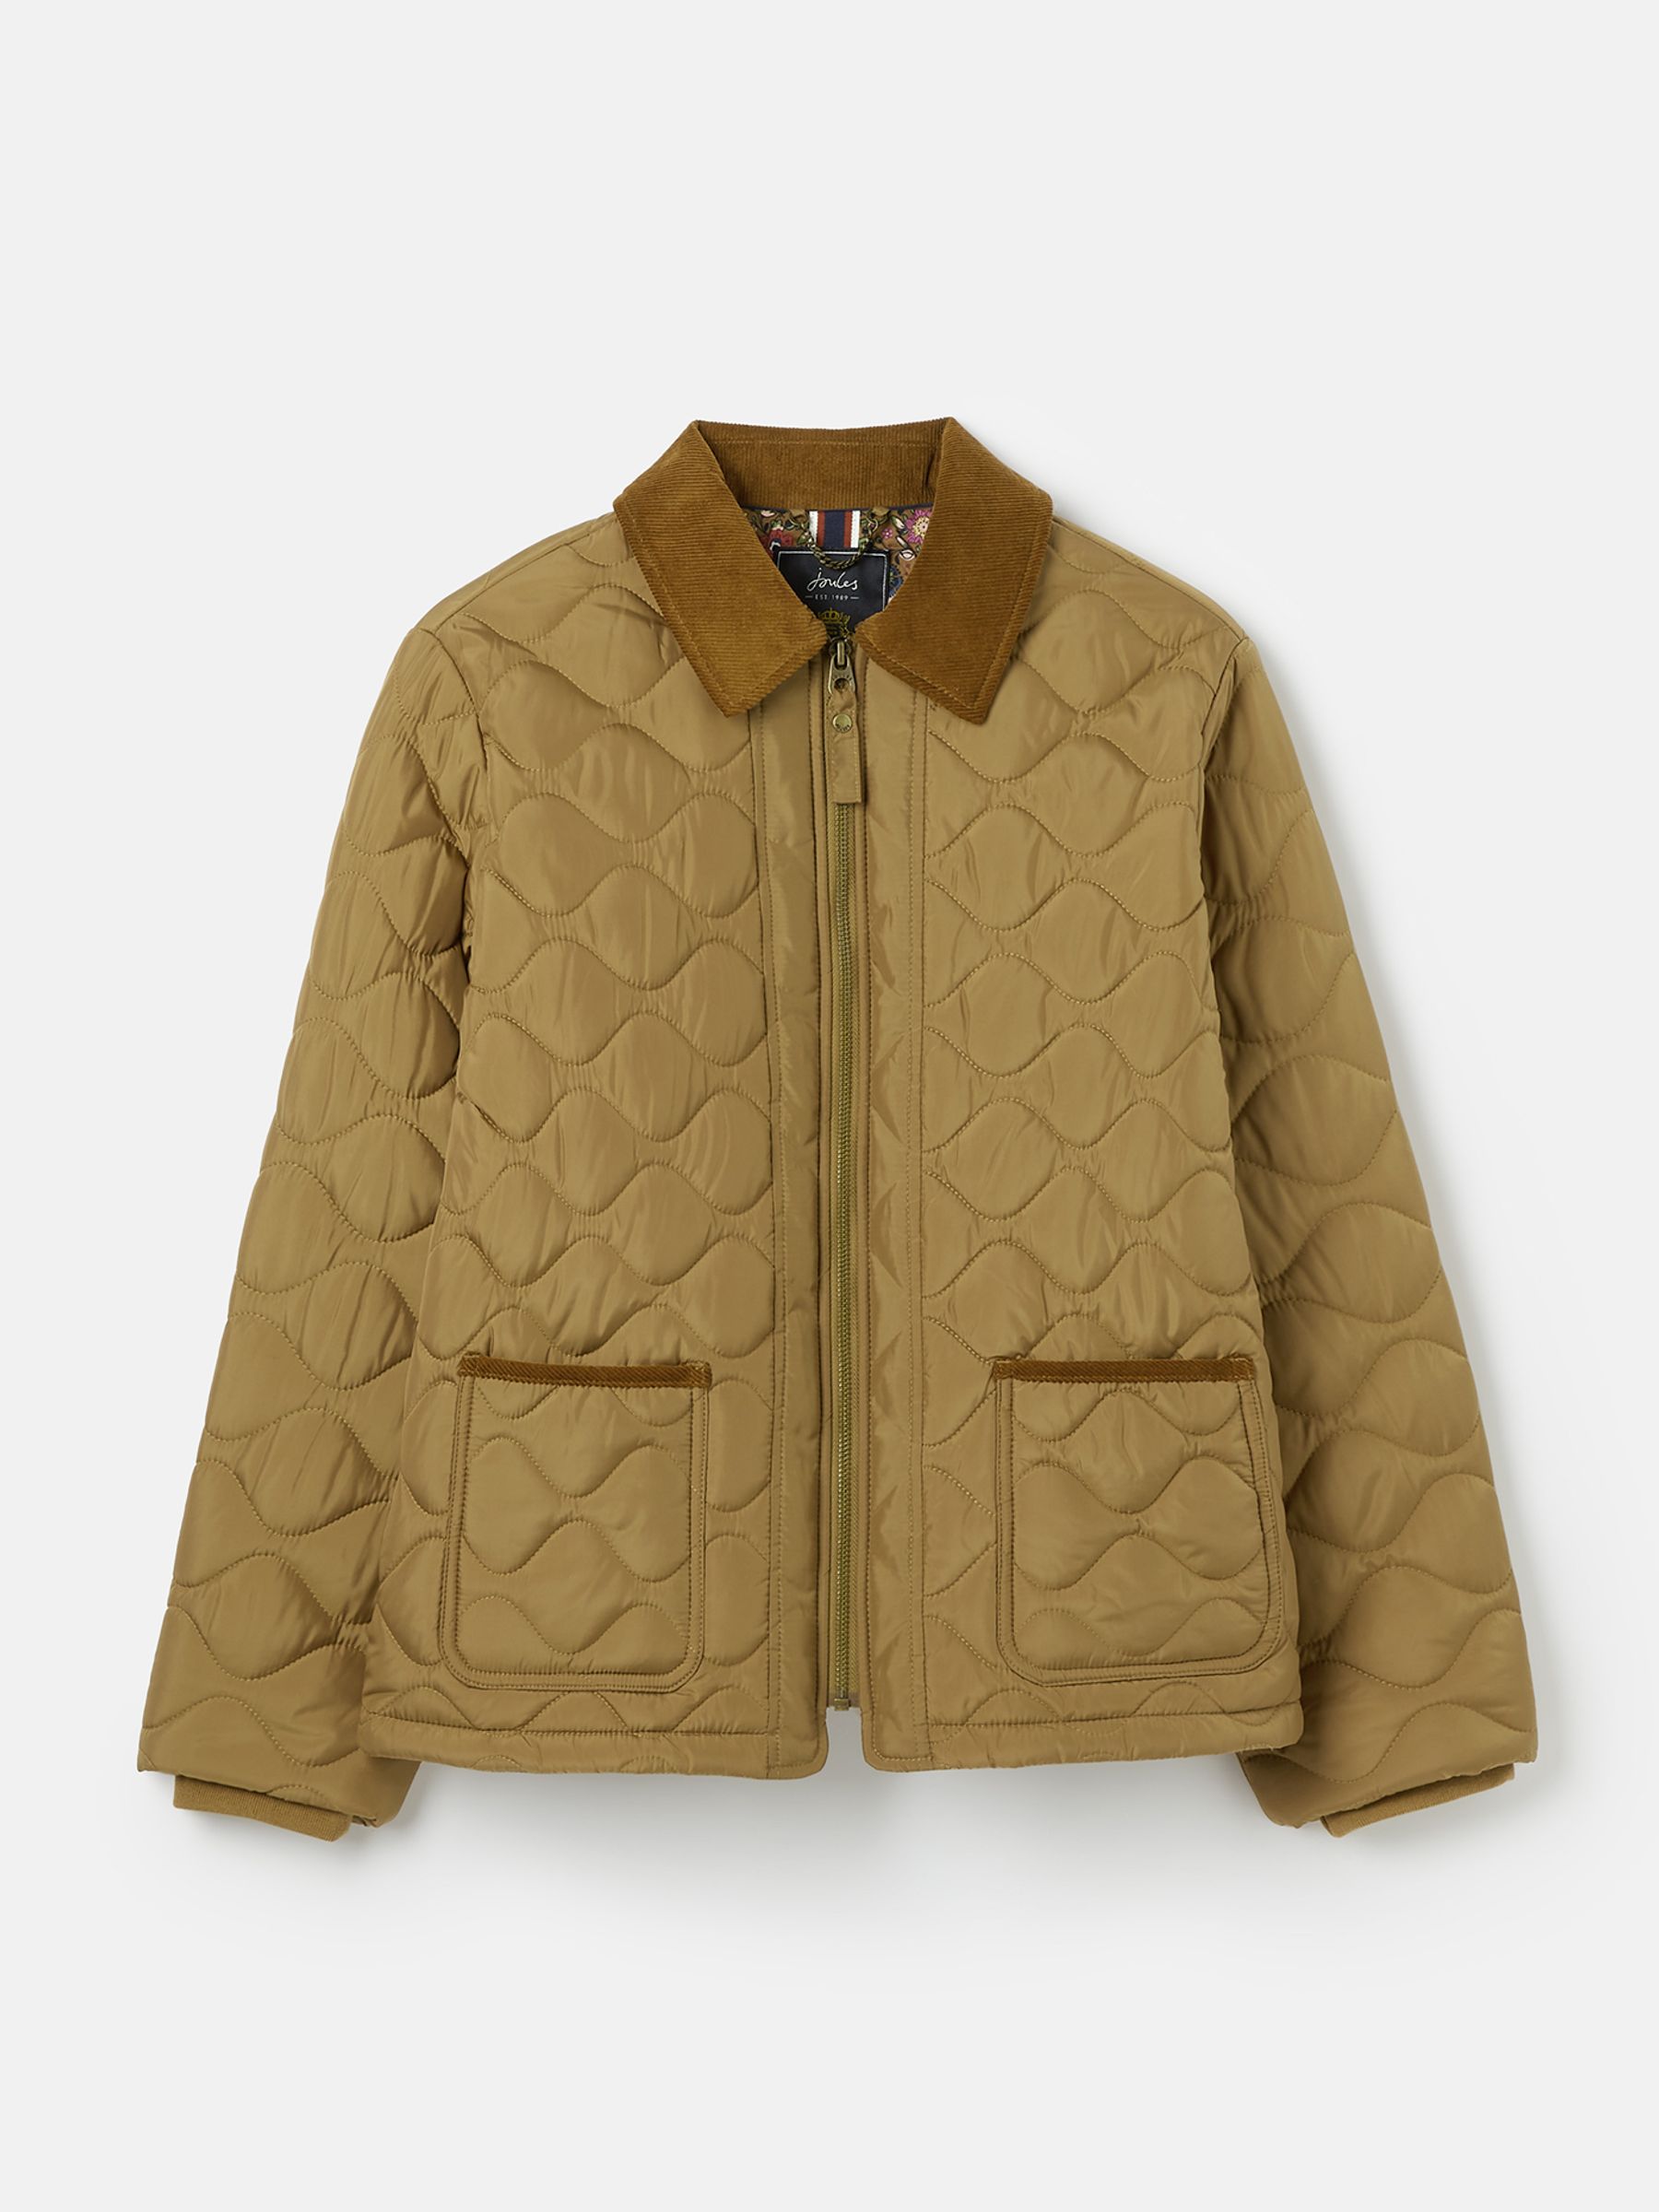 Buy Lockwood Brown Onion Quilt Jacket from the Joules online shop